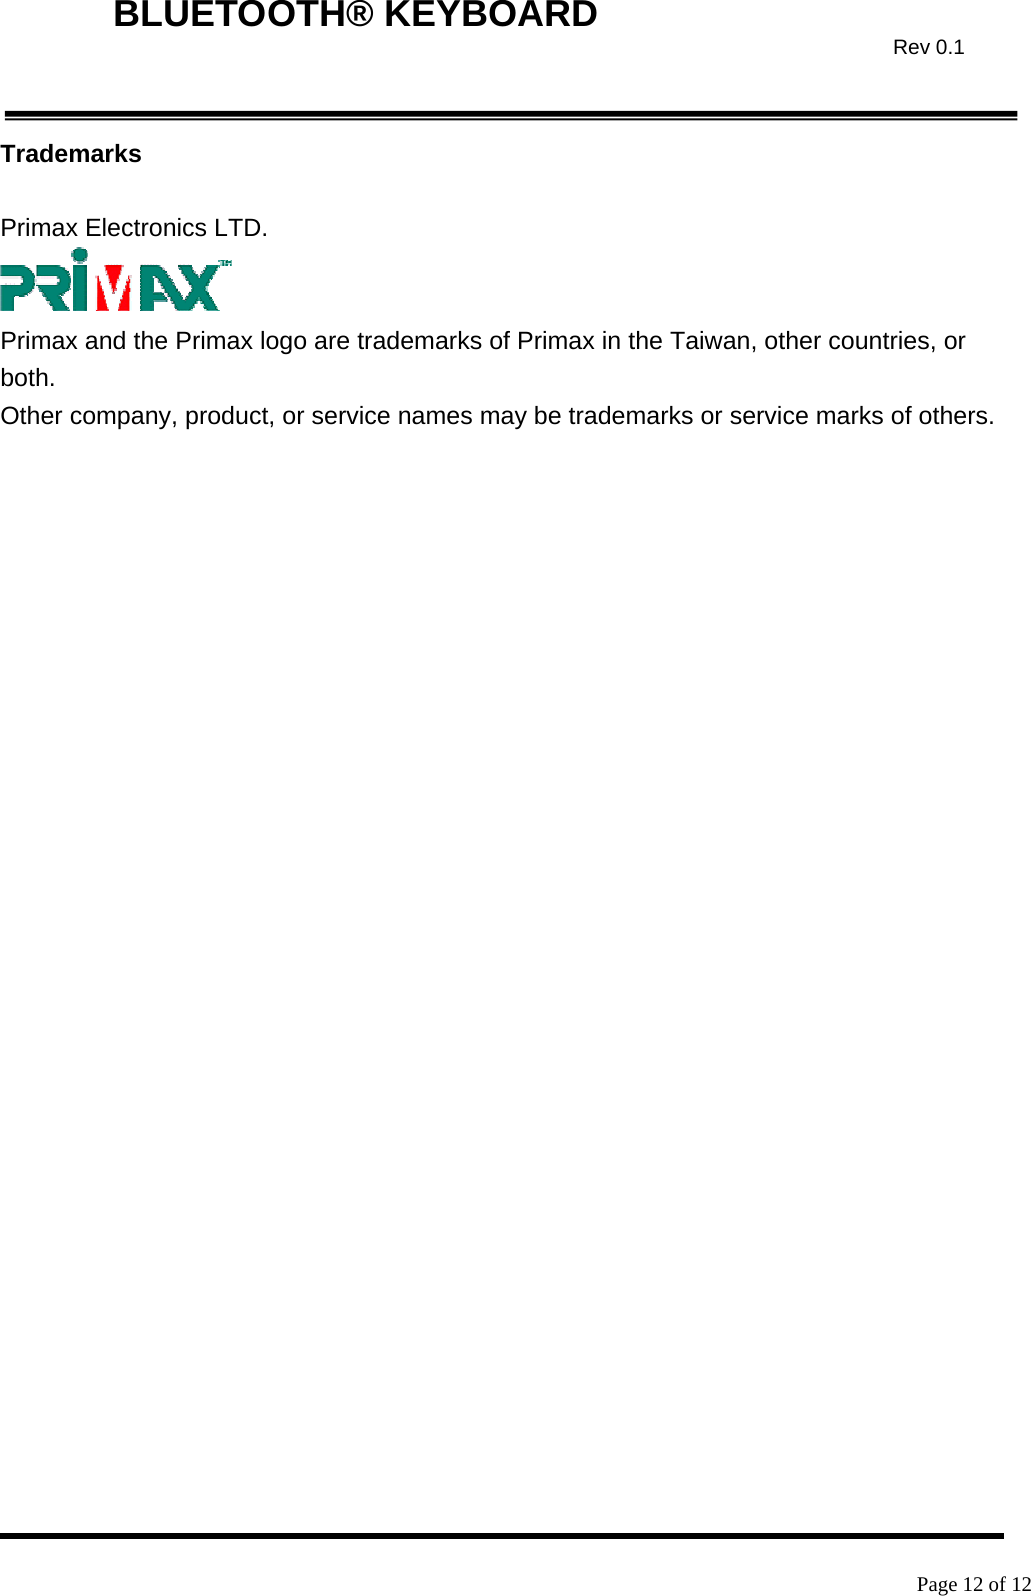    Page 12 of 12  BLUETOOTH® KEYBOARD  Rev 0.1Trademarks  Primax Electronics LTD.   Primax and the Primax logo are trademarks of Primax in the Taiwan, other countries, or both. Other company, product, or service names may be trademarks or service marks of others.  